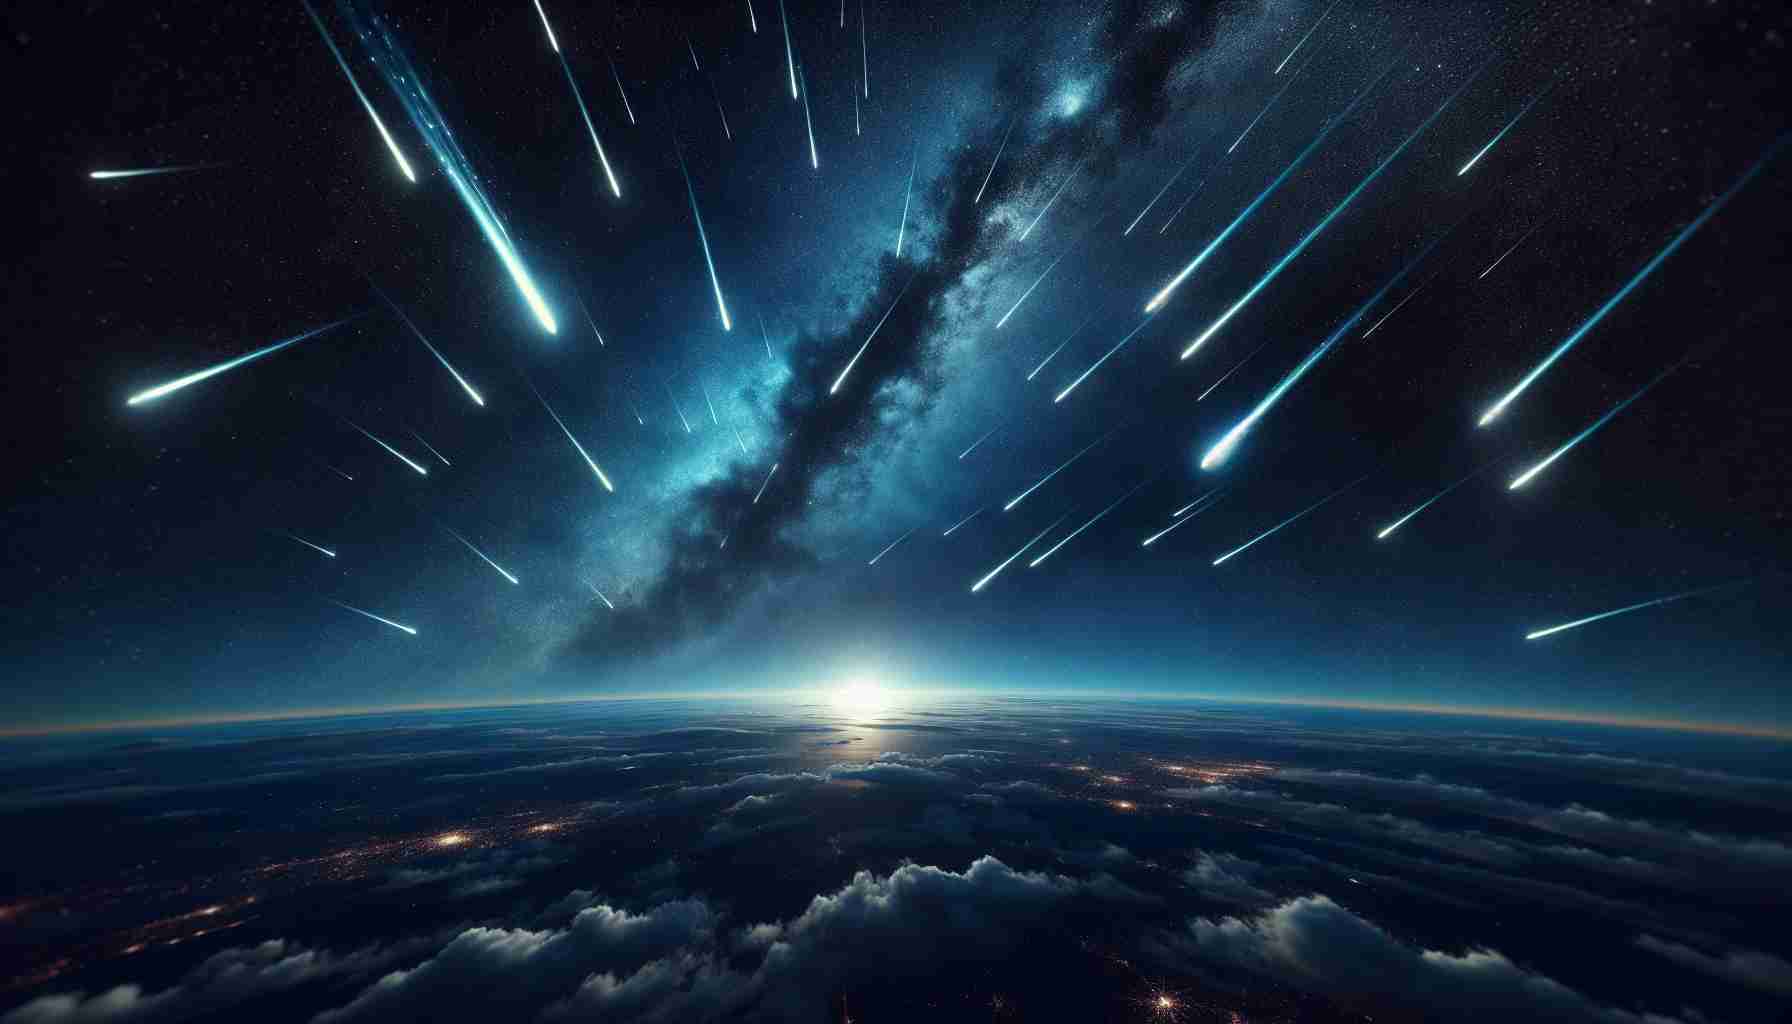 The YNormid Meteor Shower A Cosmic Spectacle